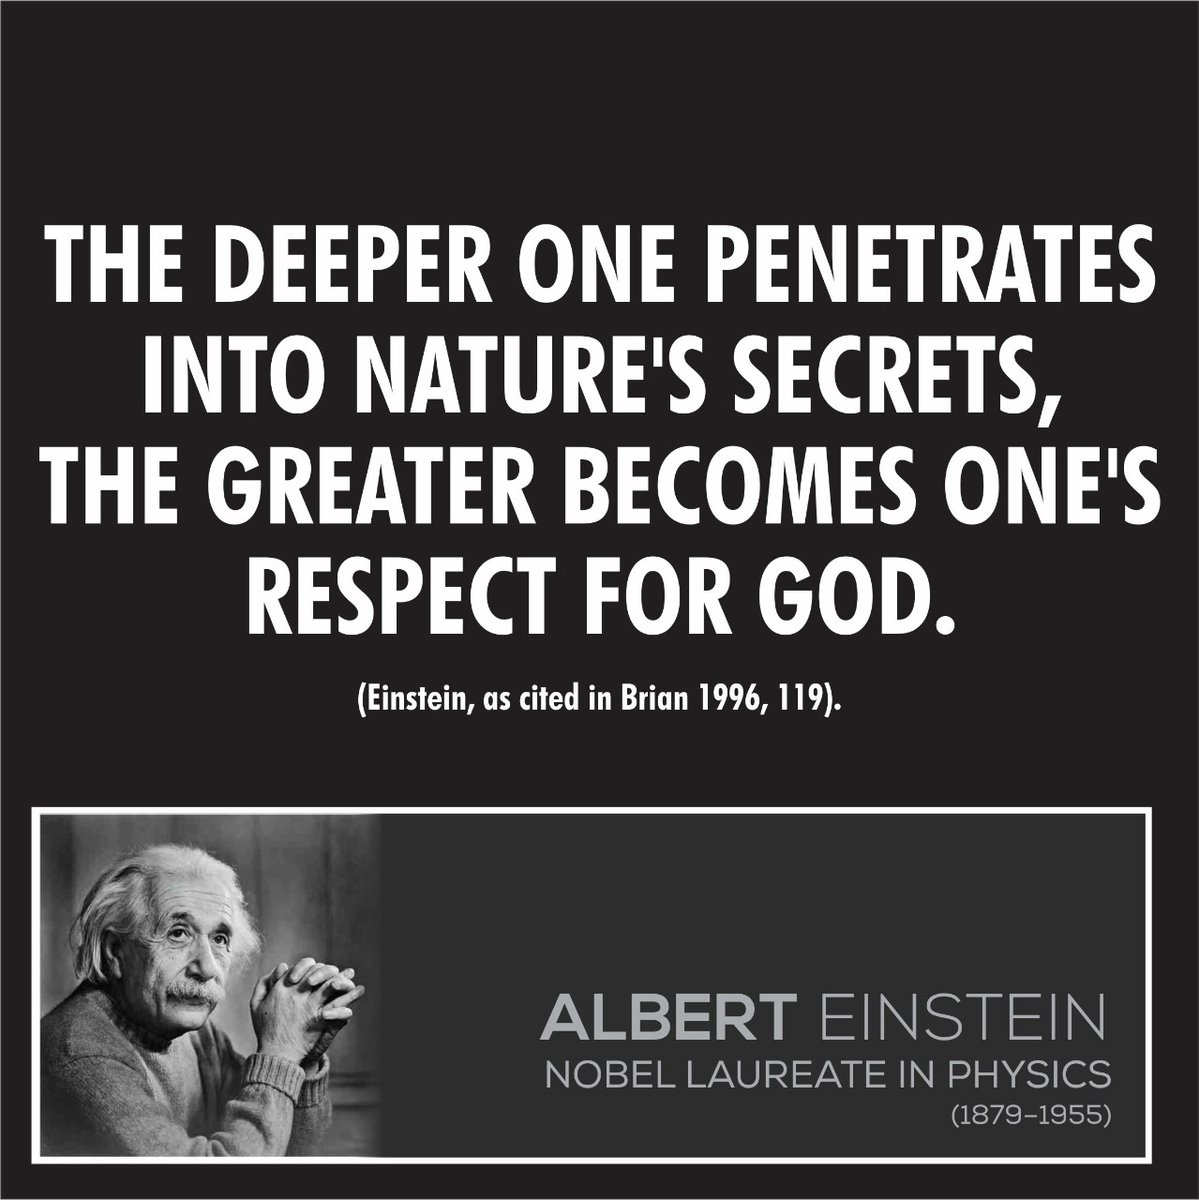 The deeper one penetrates into nature's secrets, the greater becomes one's respect for God.

--Albert Einstein

#ThursdayMotivation #thursdaymorning #WorldWildlifeDay #RussianUkrainianWar #spiritualgrowth #God #quotes #InspirationalQuote #health #happiness #Bhagavadgita https://t.co/qvLAfO168S